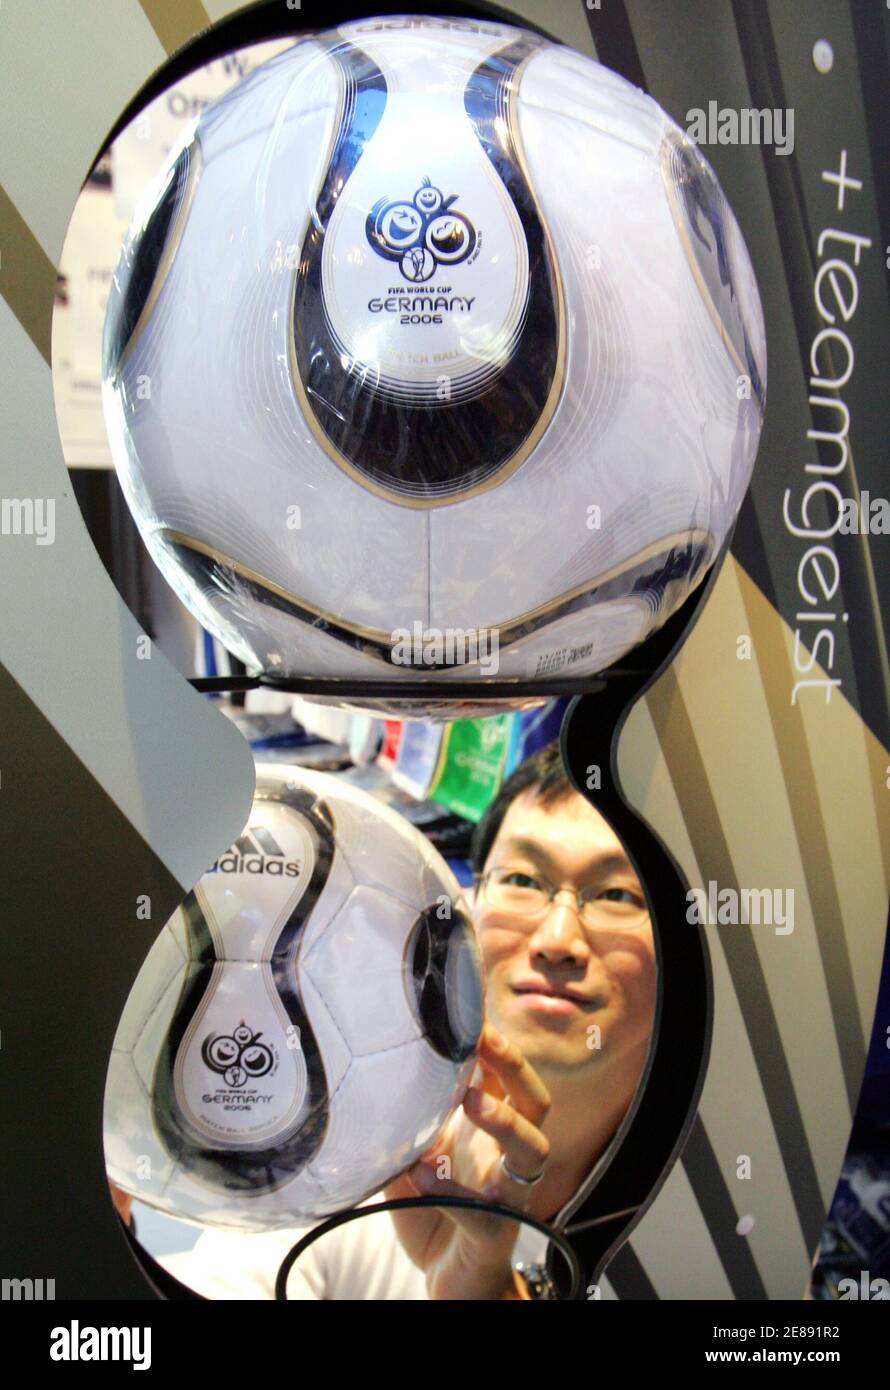 A Japanese shop clerk displays the official World Cup "Teamgeist" soccer  ball for sale at the 2006 FIFA World Cup Official Shop Operated under  licence by FamilyMart in Tokyo April 18, 2006.